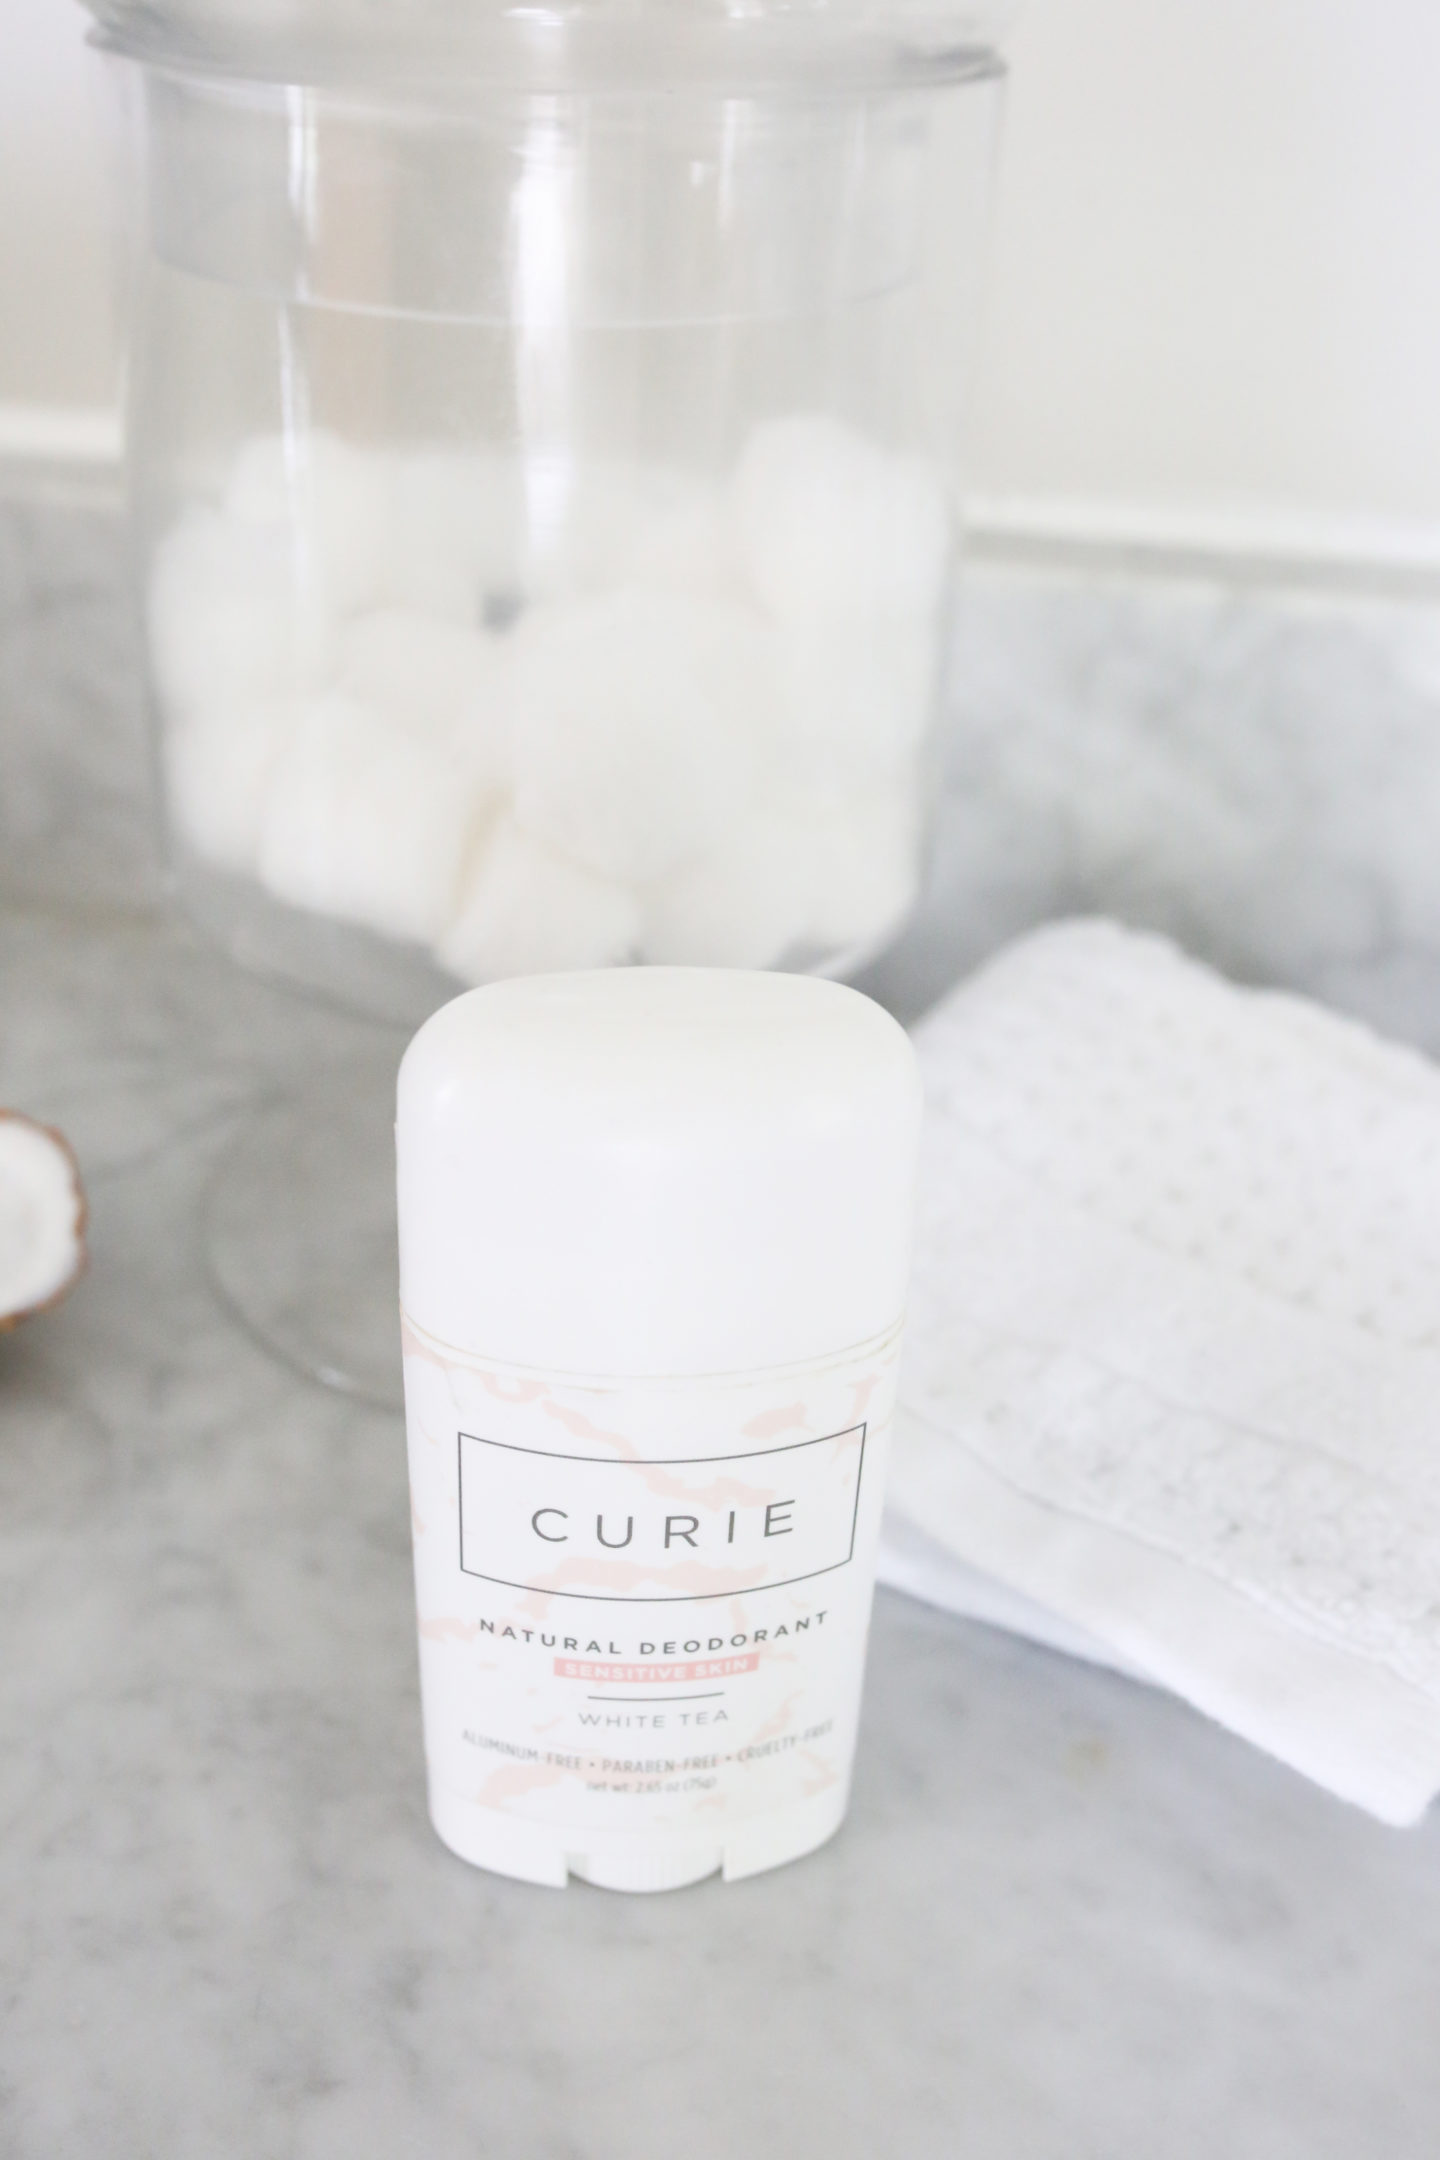 Curie Deodorant Review_